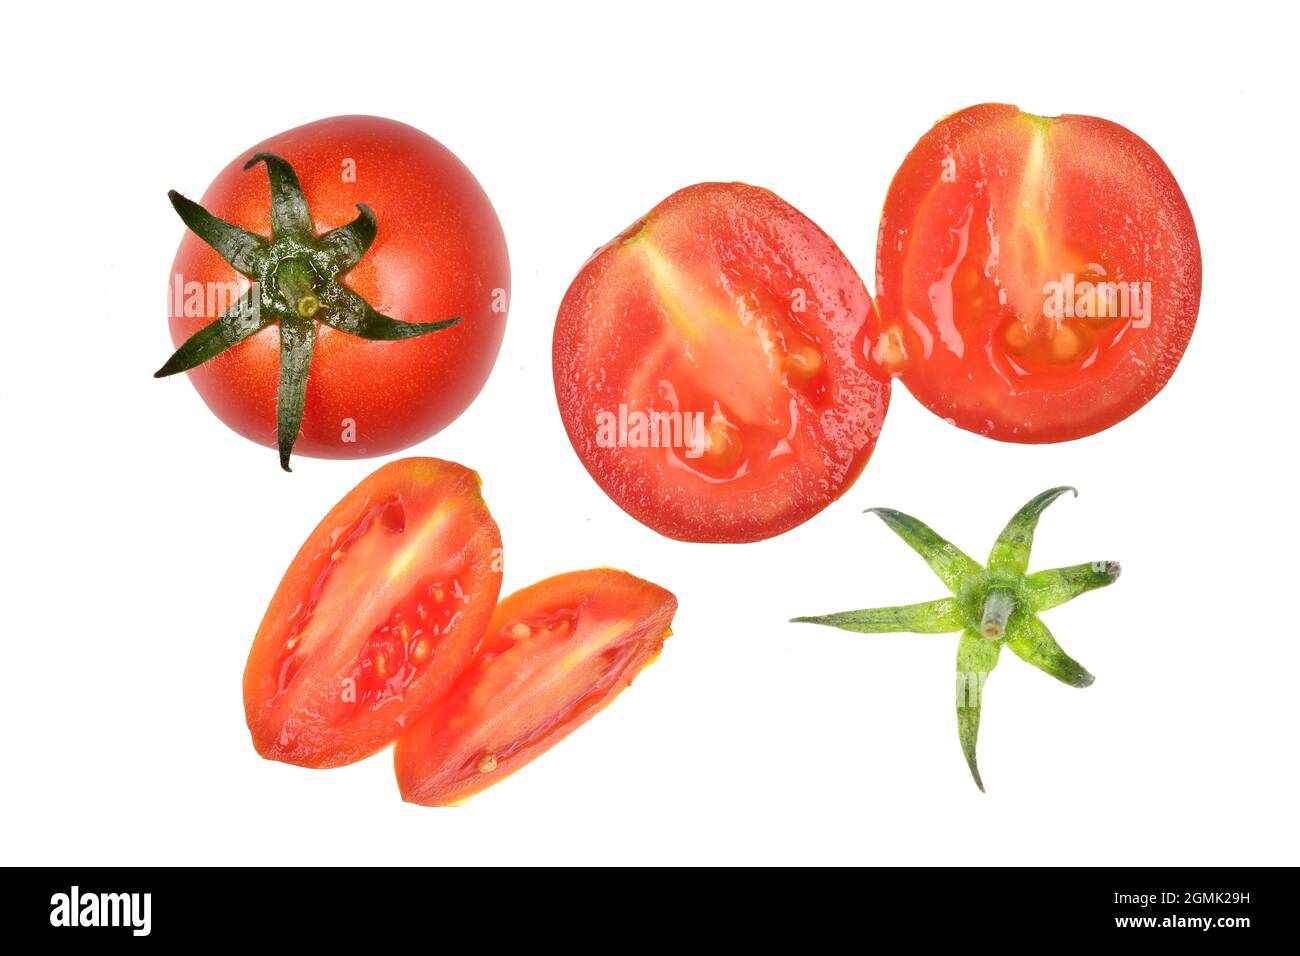 Whole Tomato with Tomato Slice Isolated on White Background with Clipping Path Stock Photo